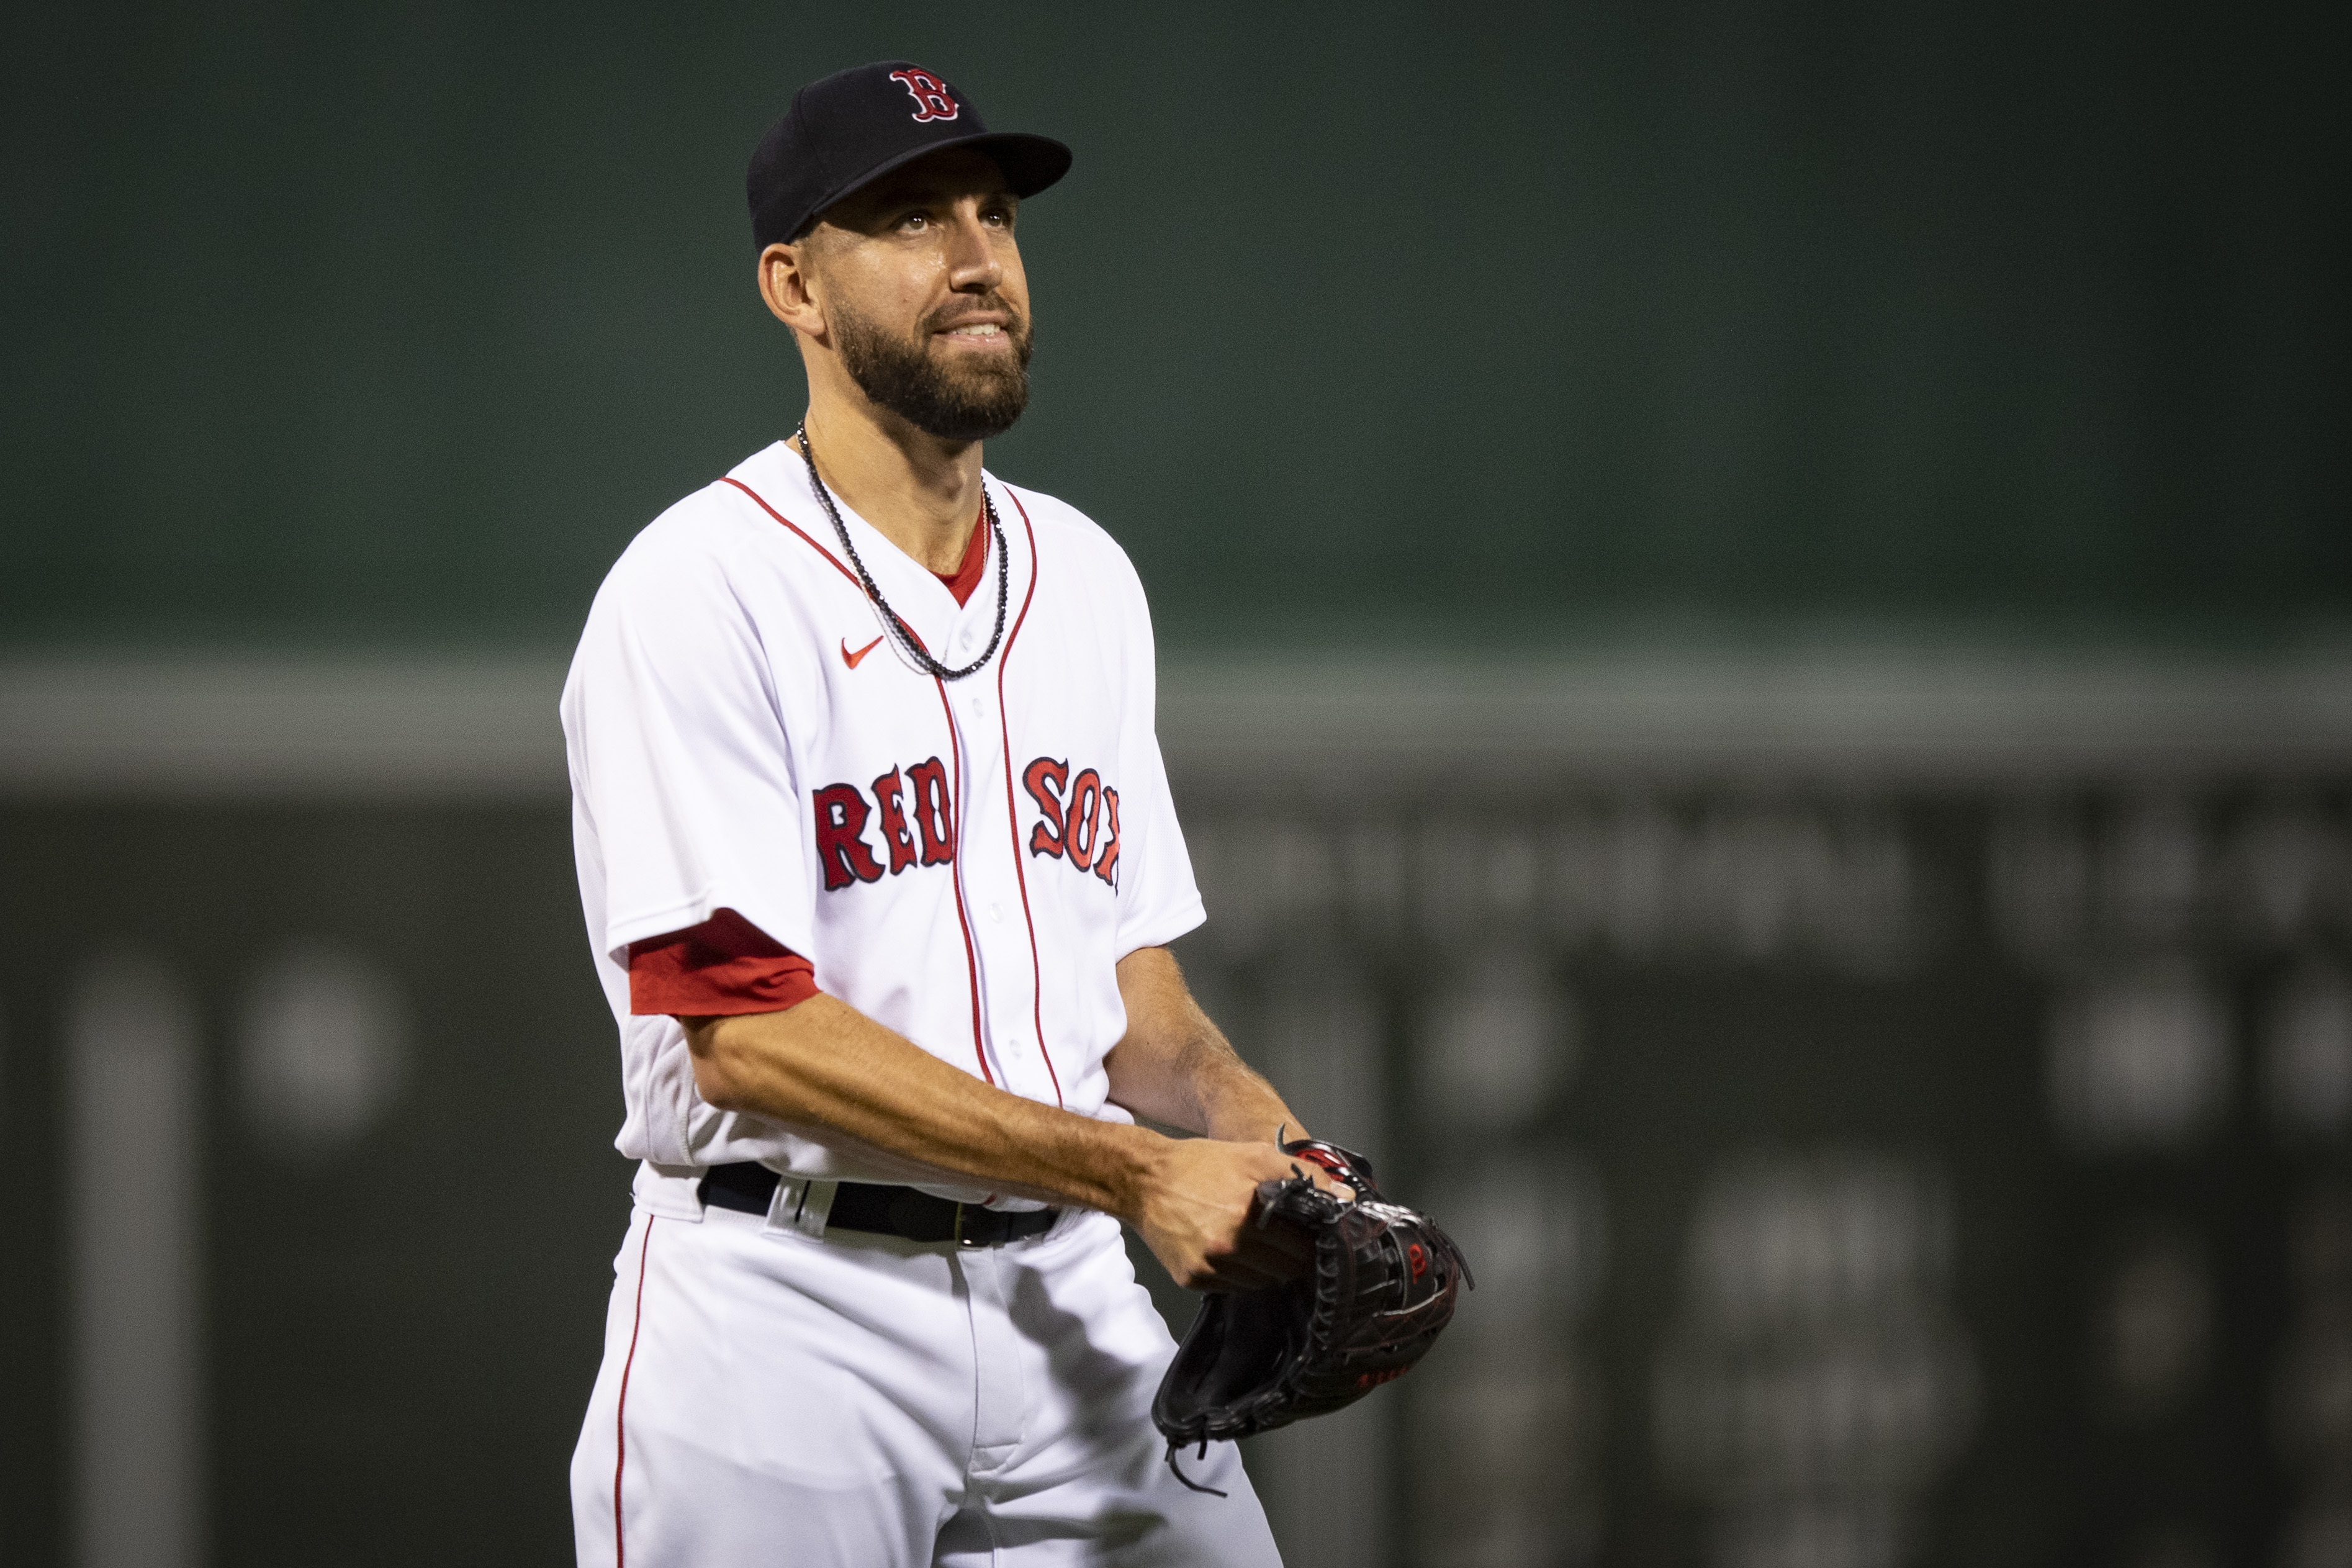 Mazz: Has Matt Barnes become unglued? And was this another Red Sox